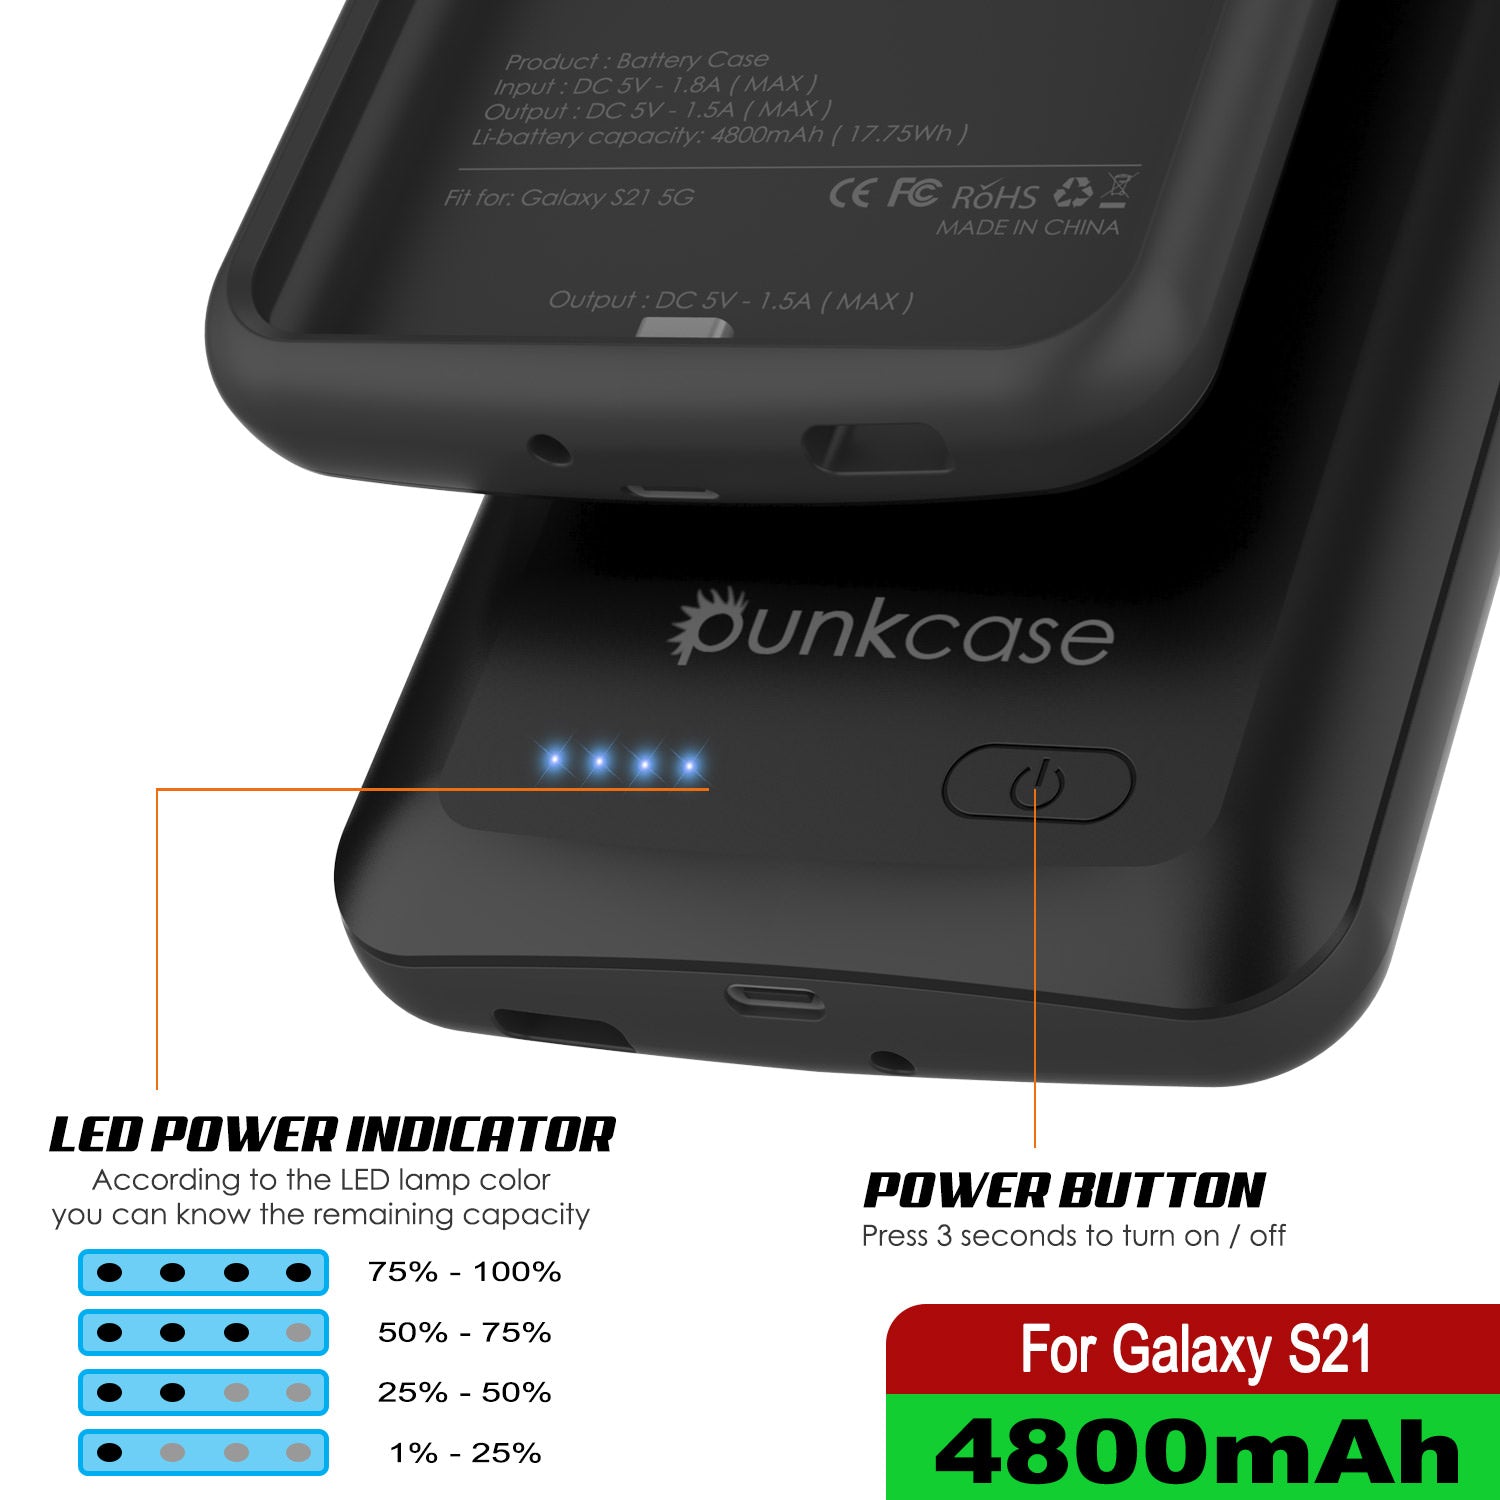 PunkJuice S21 Battery Case Black - Portable Charging Power Juice Bank with 4800mAh